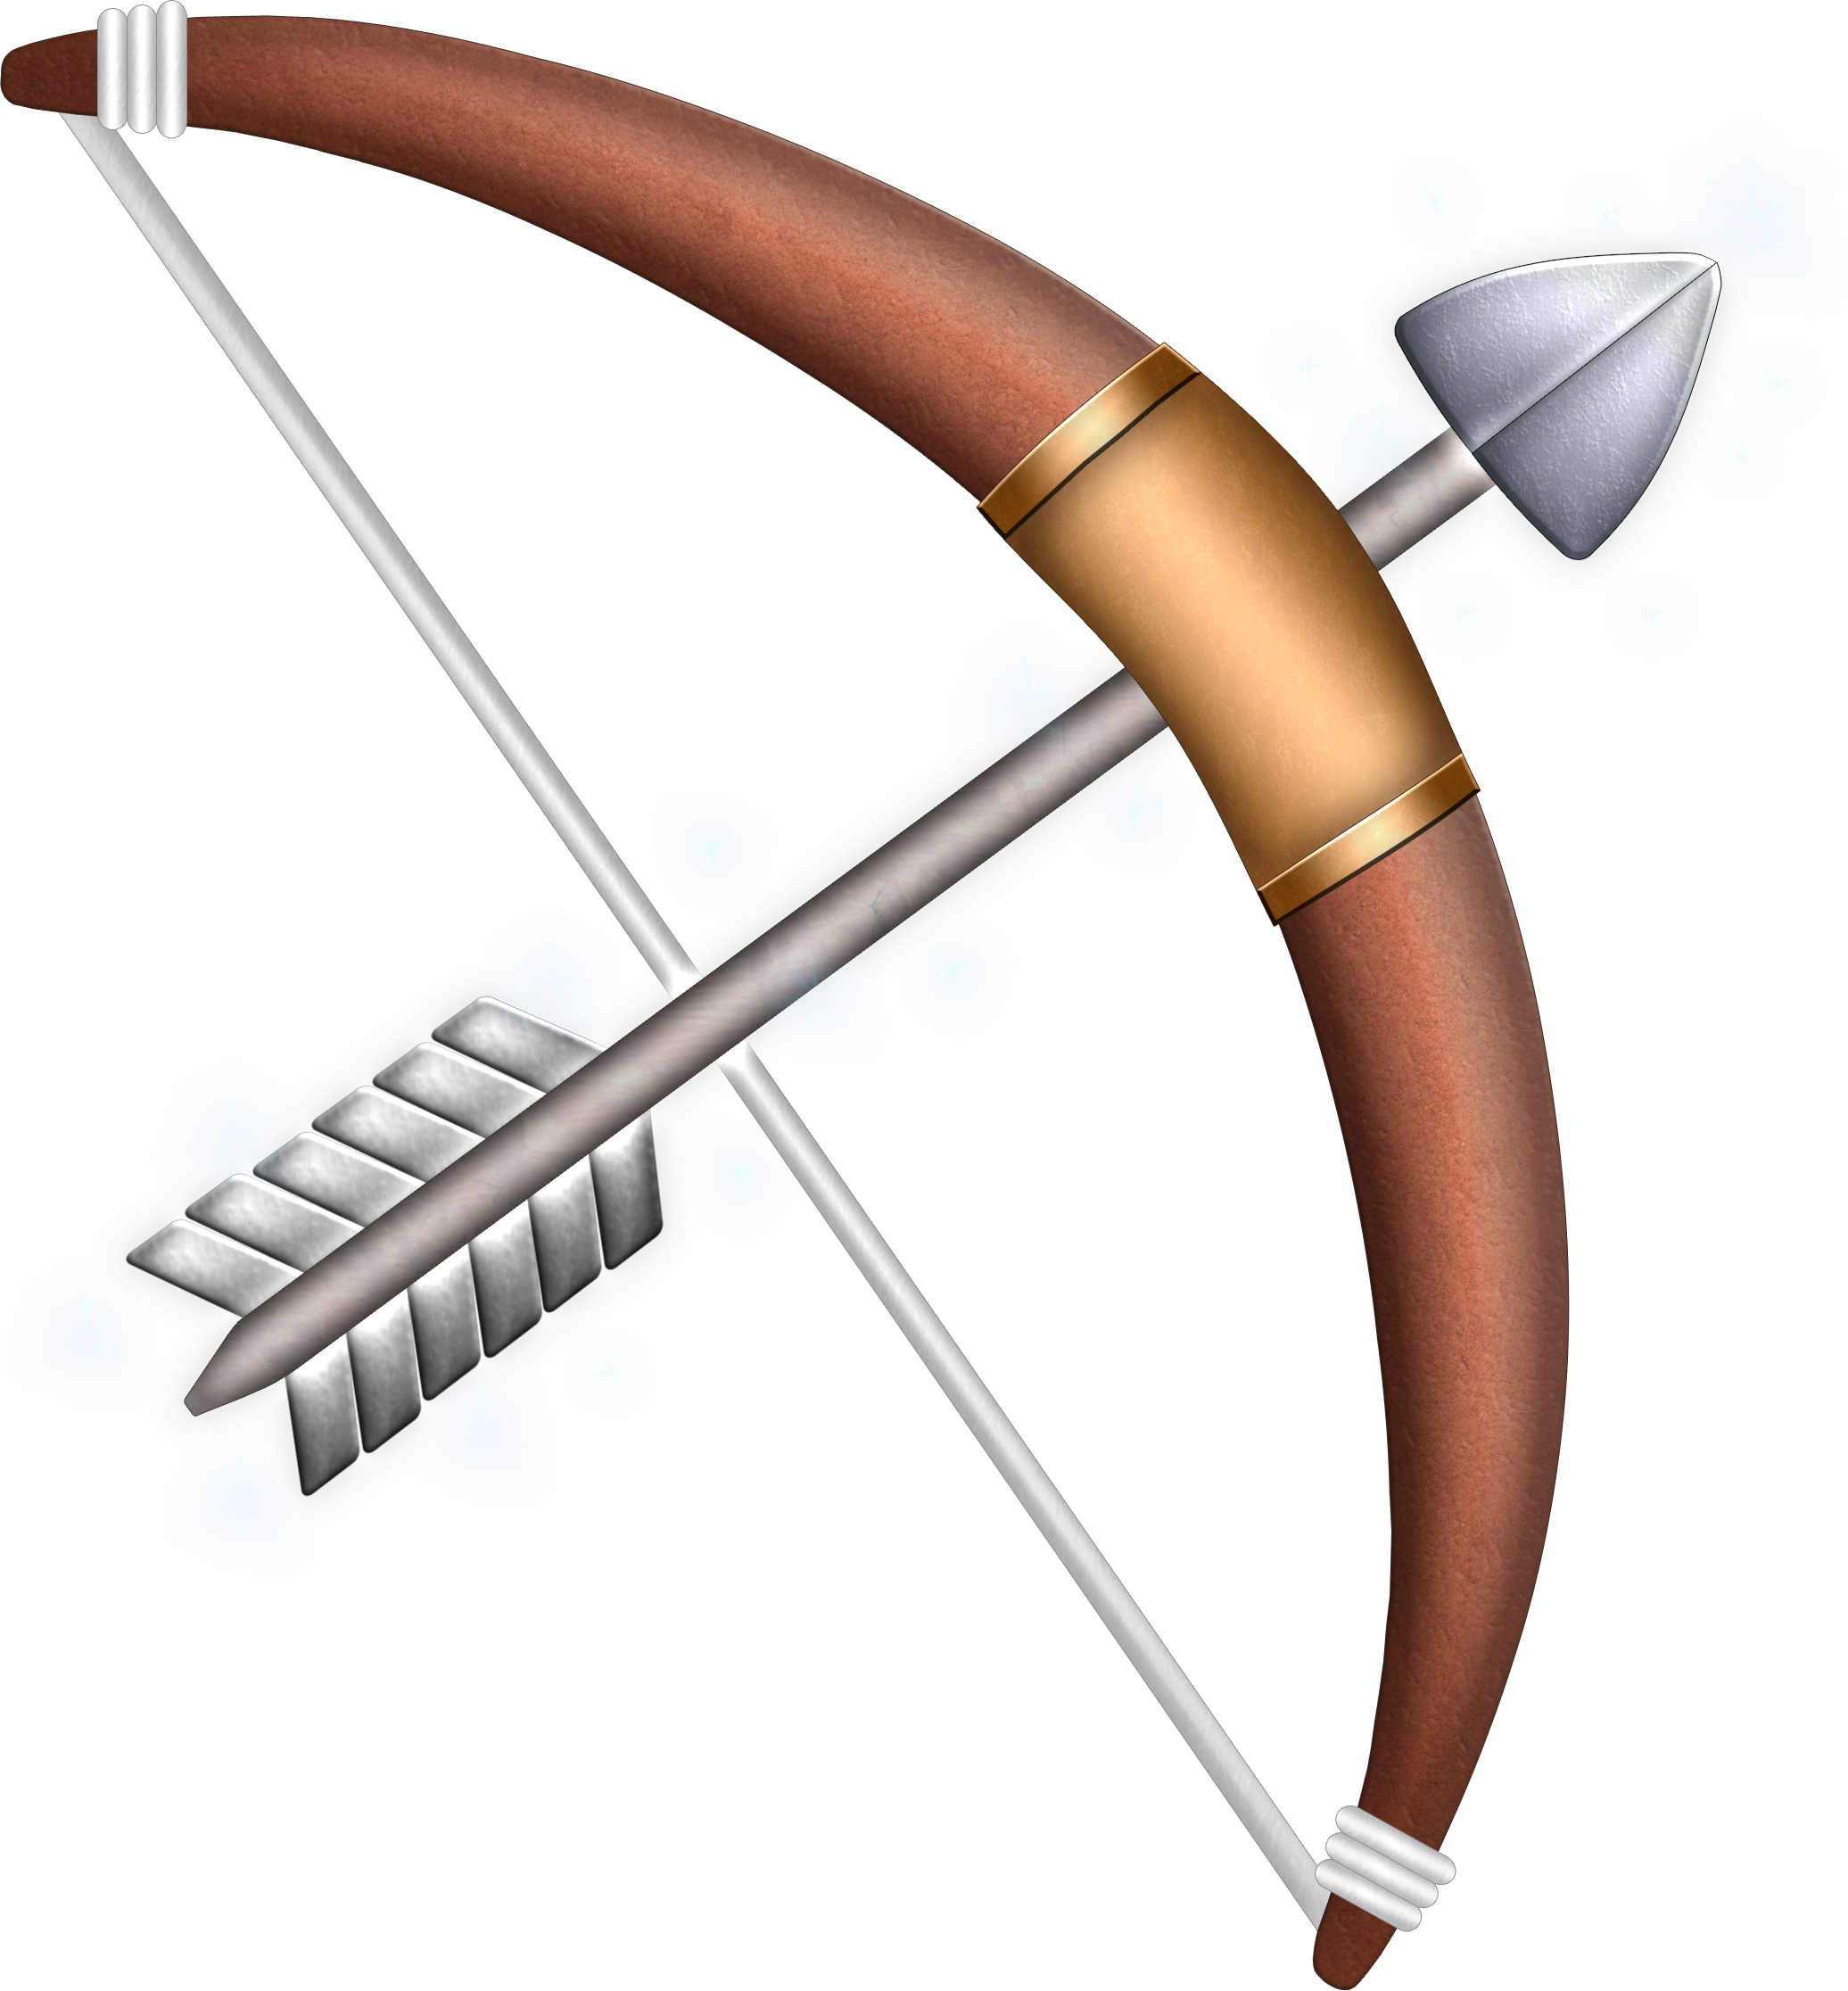 ALTTP Bow and Silver Arrow by BLUEamnesiac on Clipart library